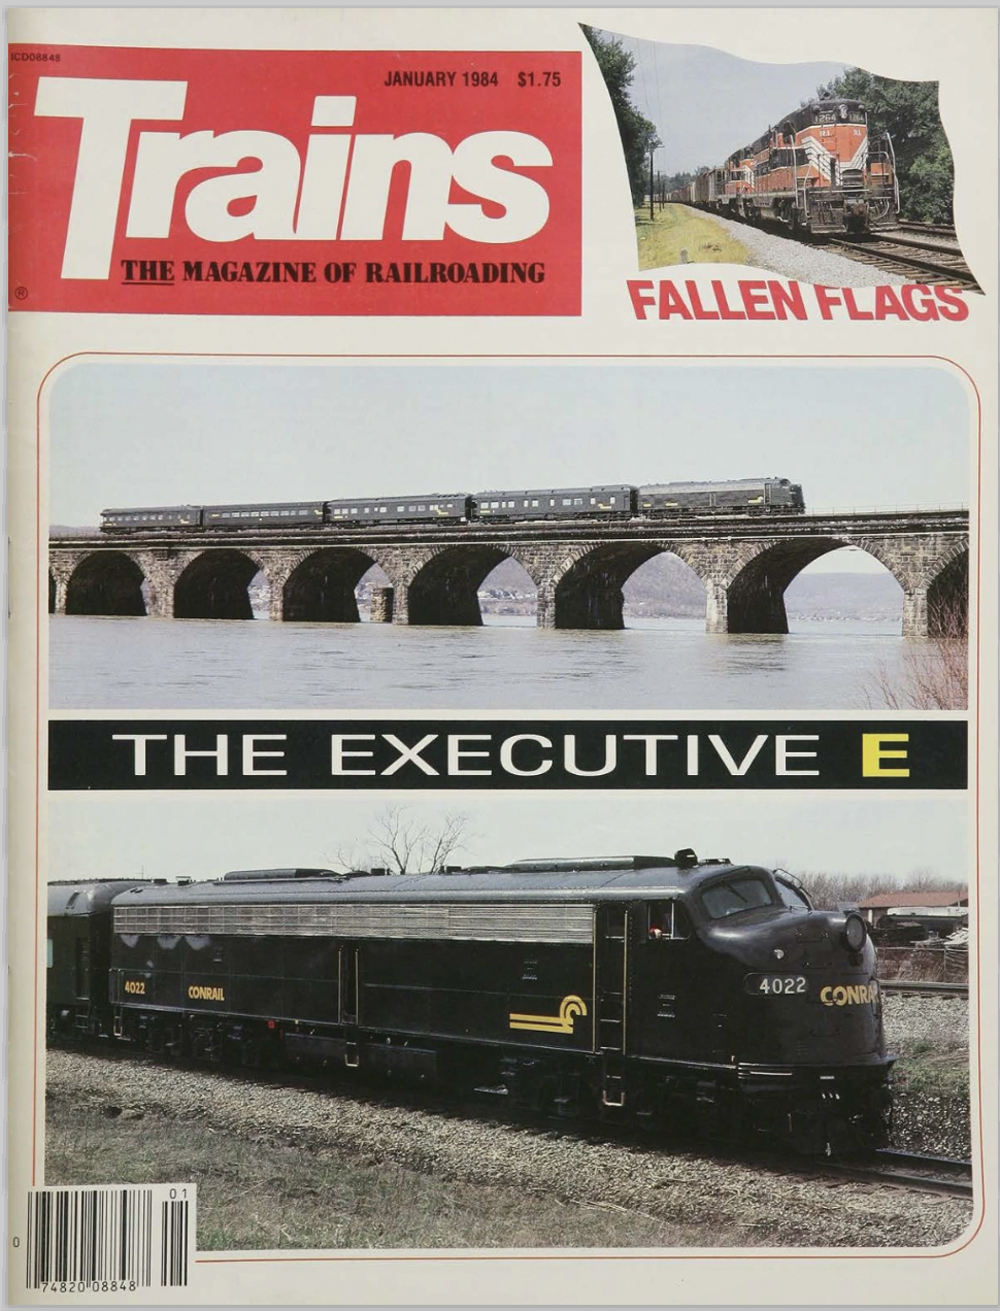 January 1984 cover of Trains